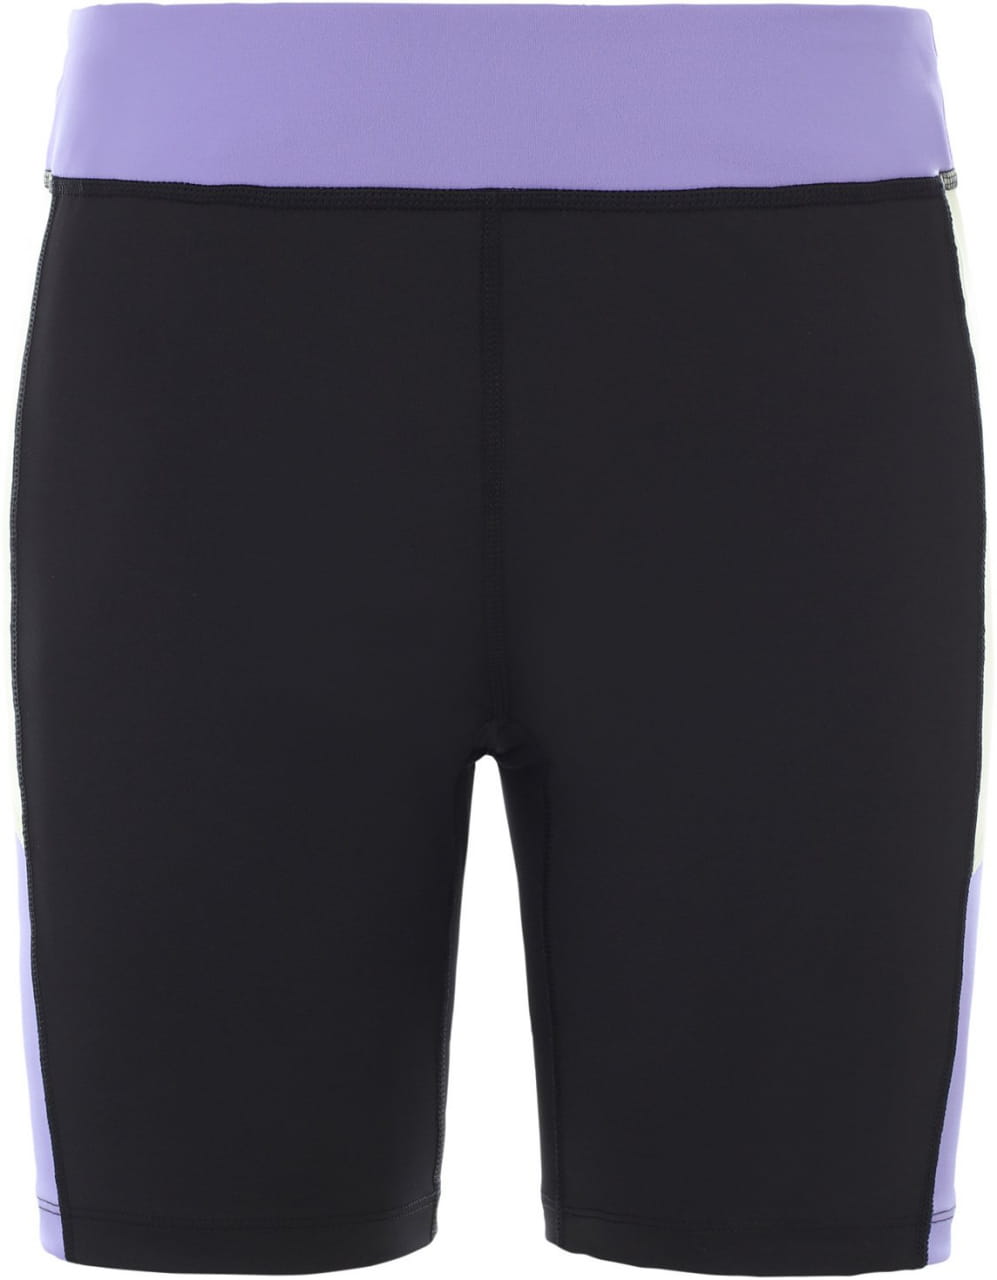 Shorts The North Face Women's '92 Extreme Knit Shorts